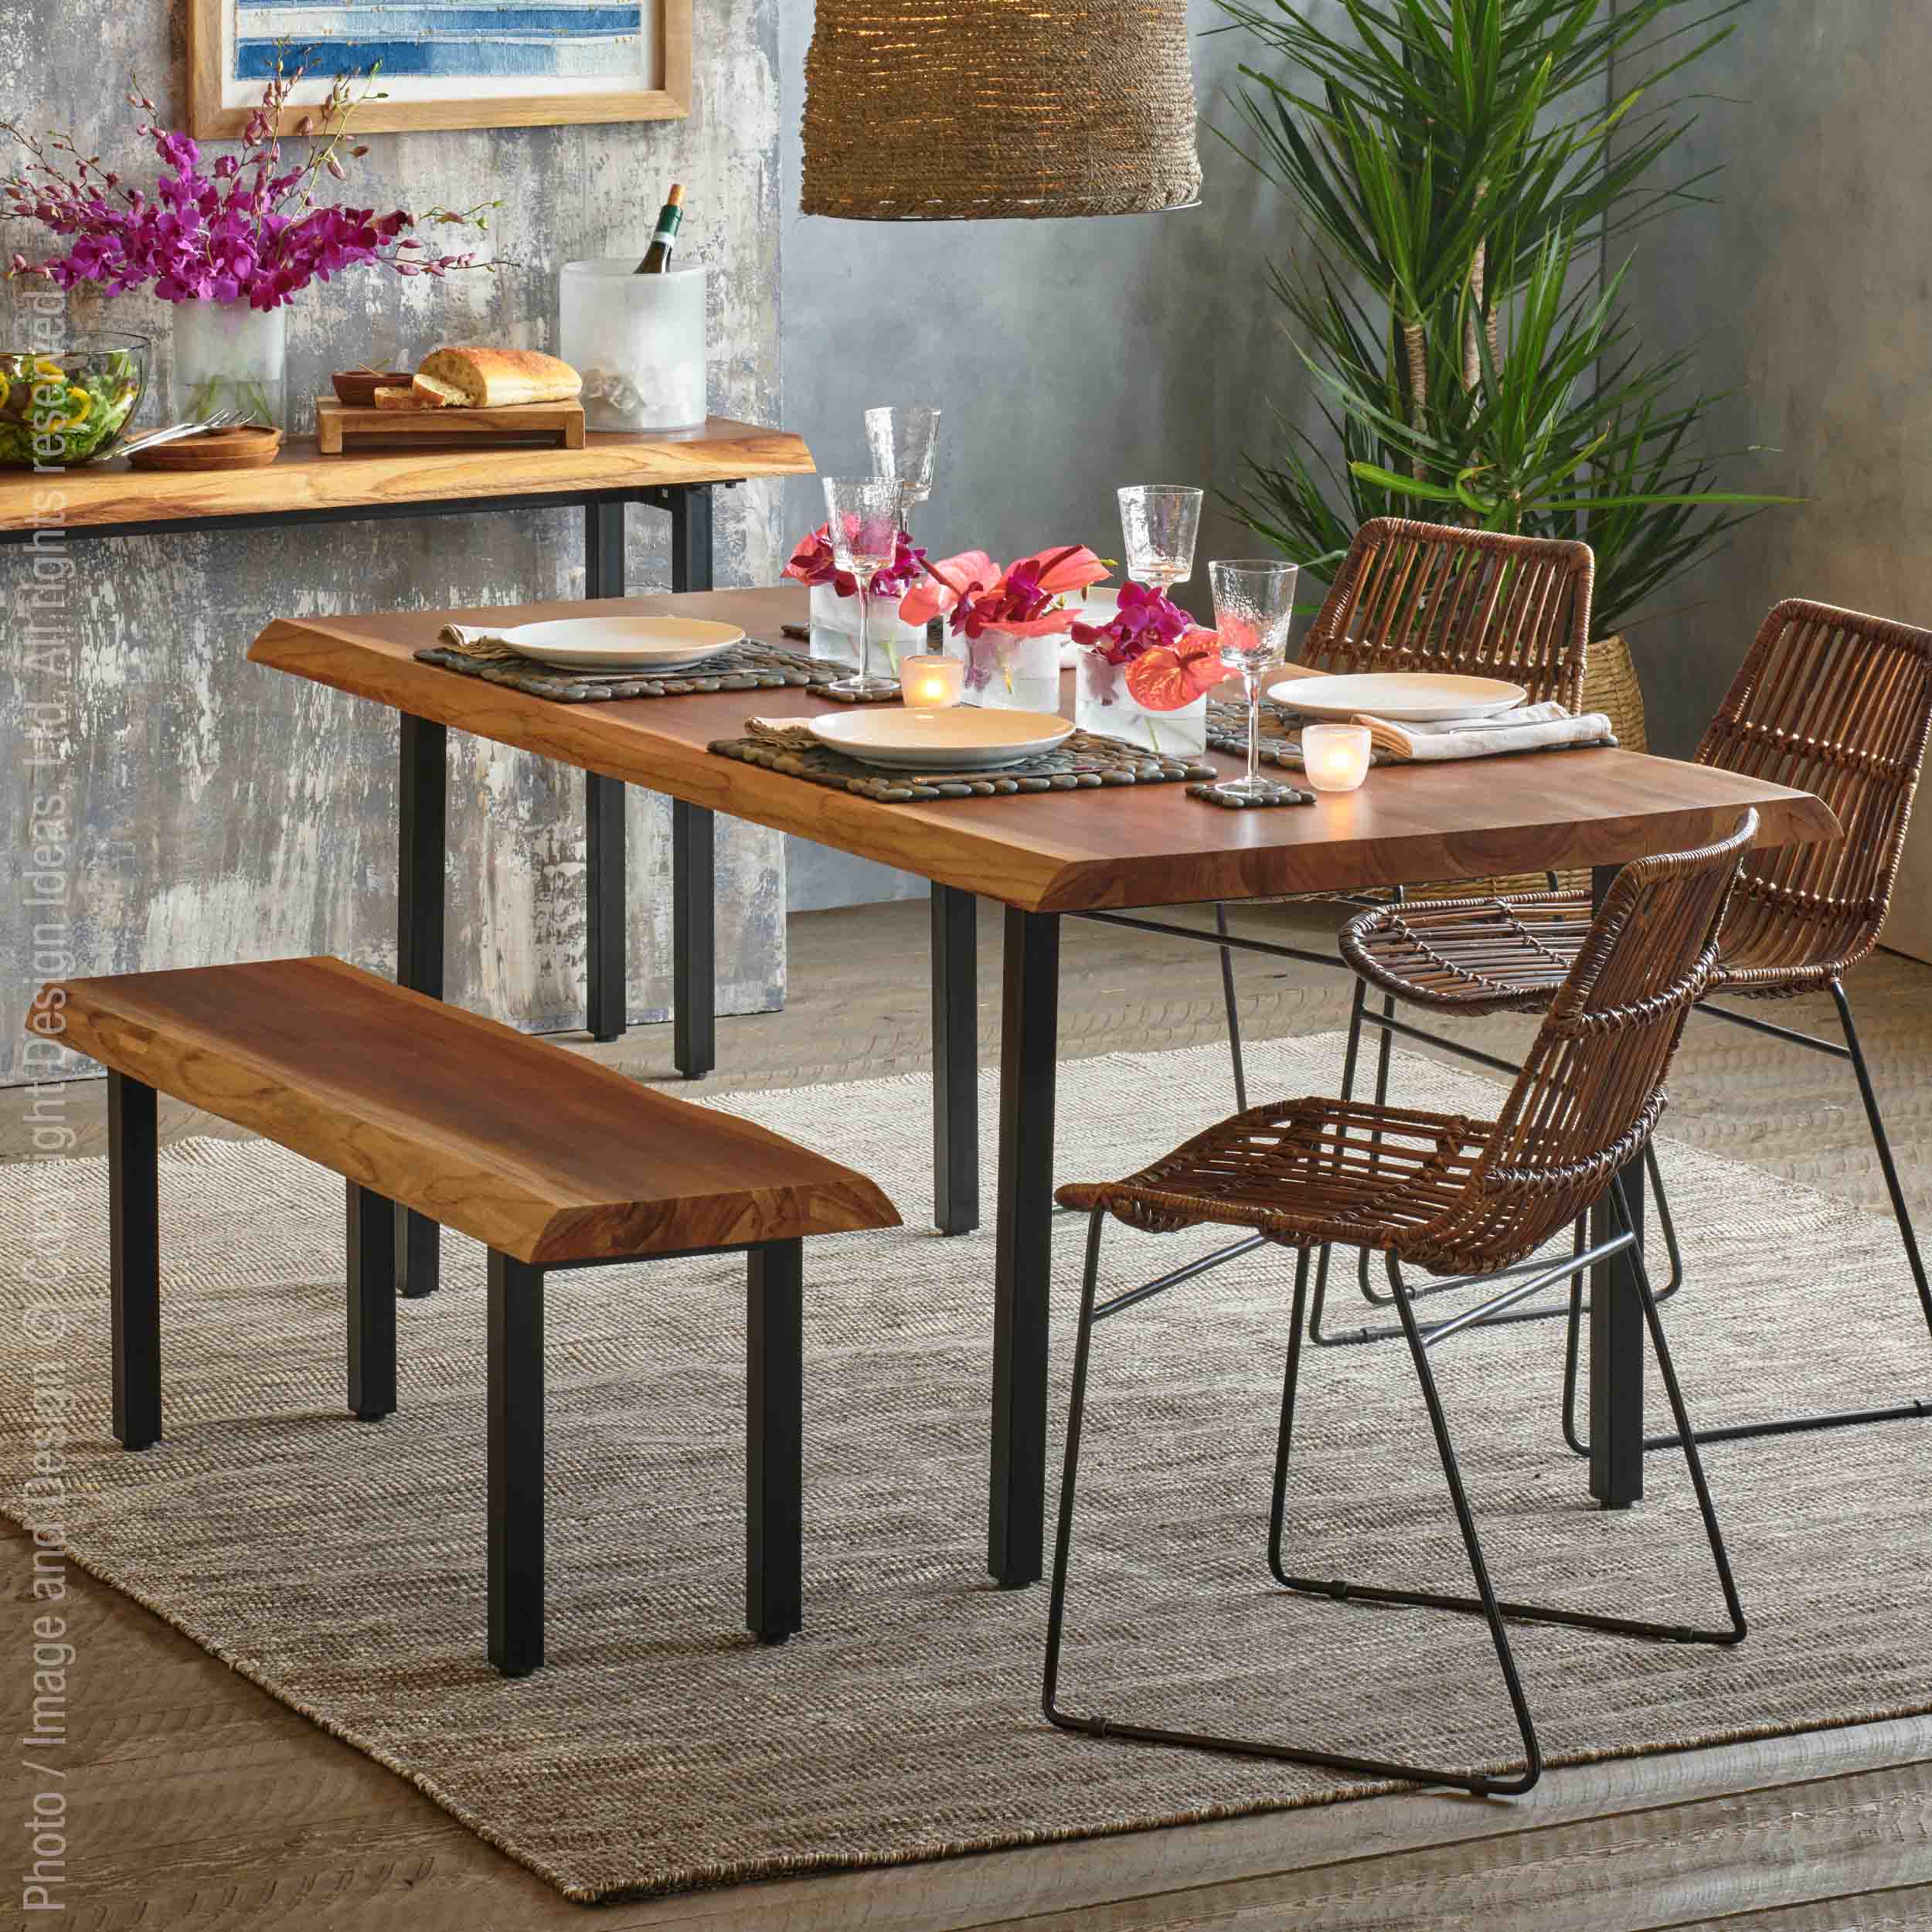 Takara™ live edge dining table - Natural | Image 3 | Premium Table from the Takara collection | made with Teak for long lasting use | texxture